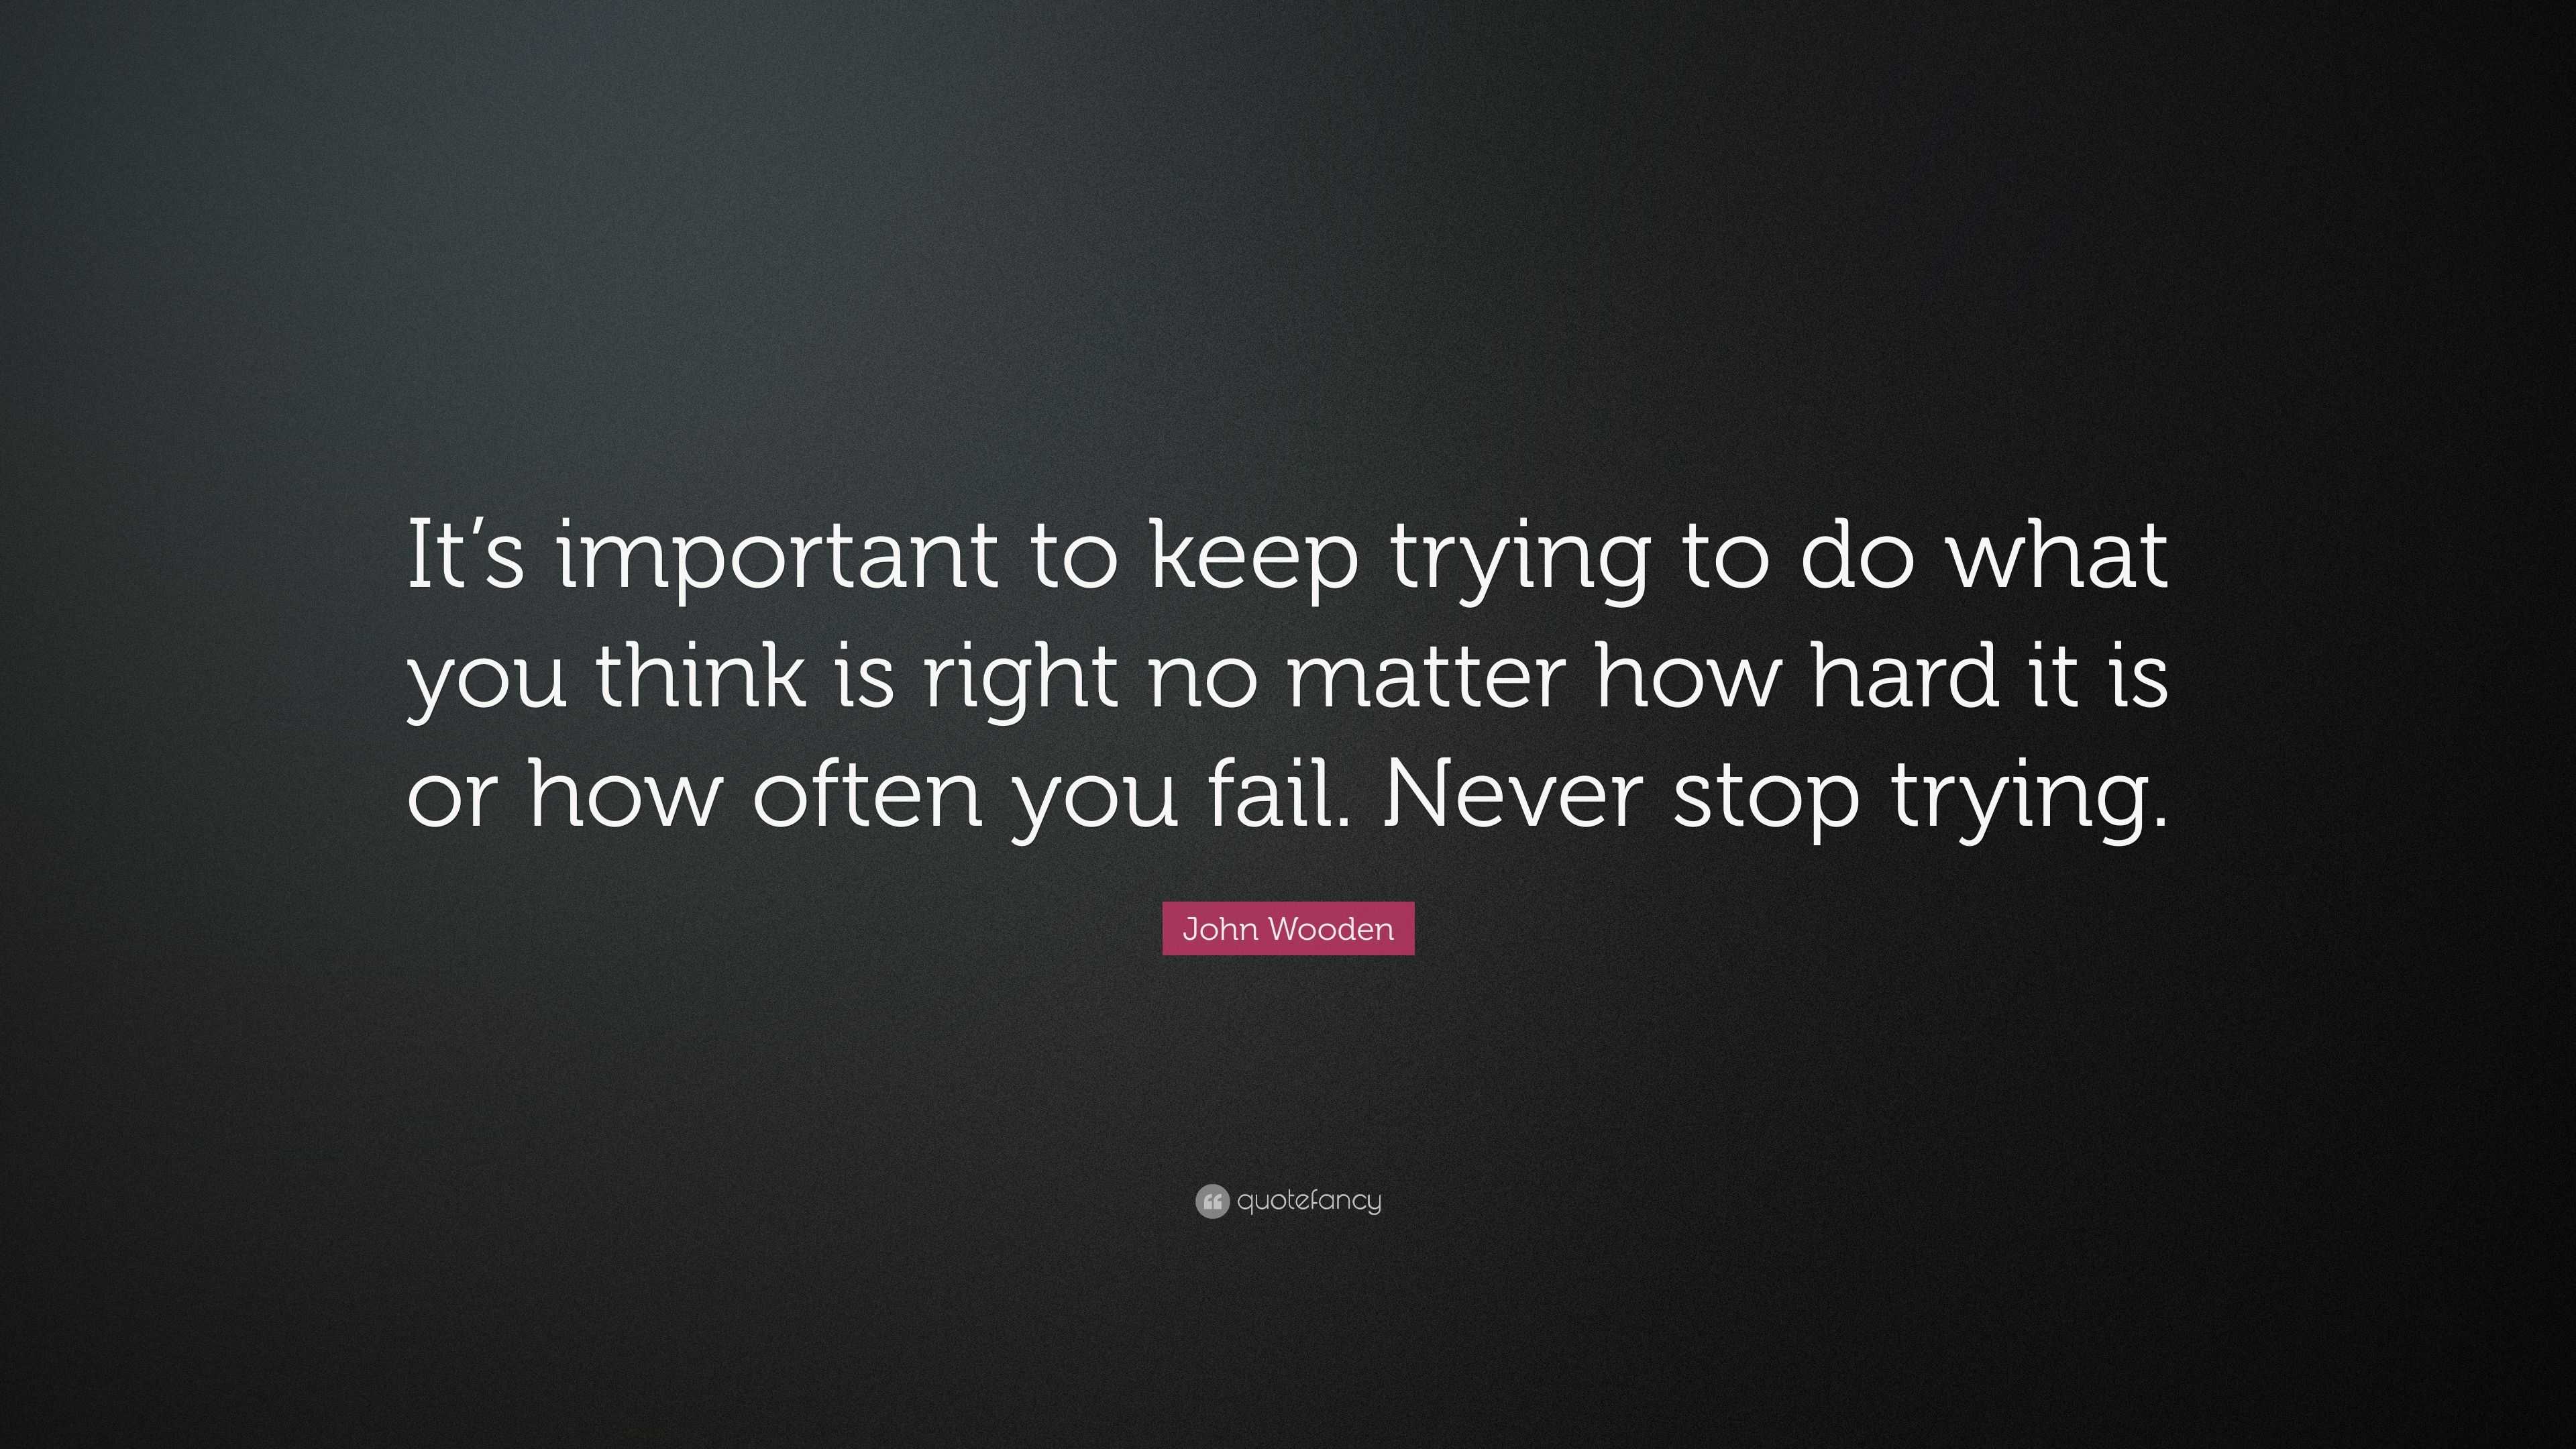 John Wooden Quote: “It’s important to keep trying to do what you think ...